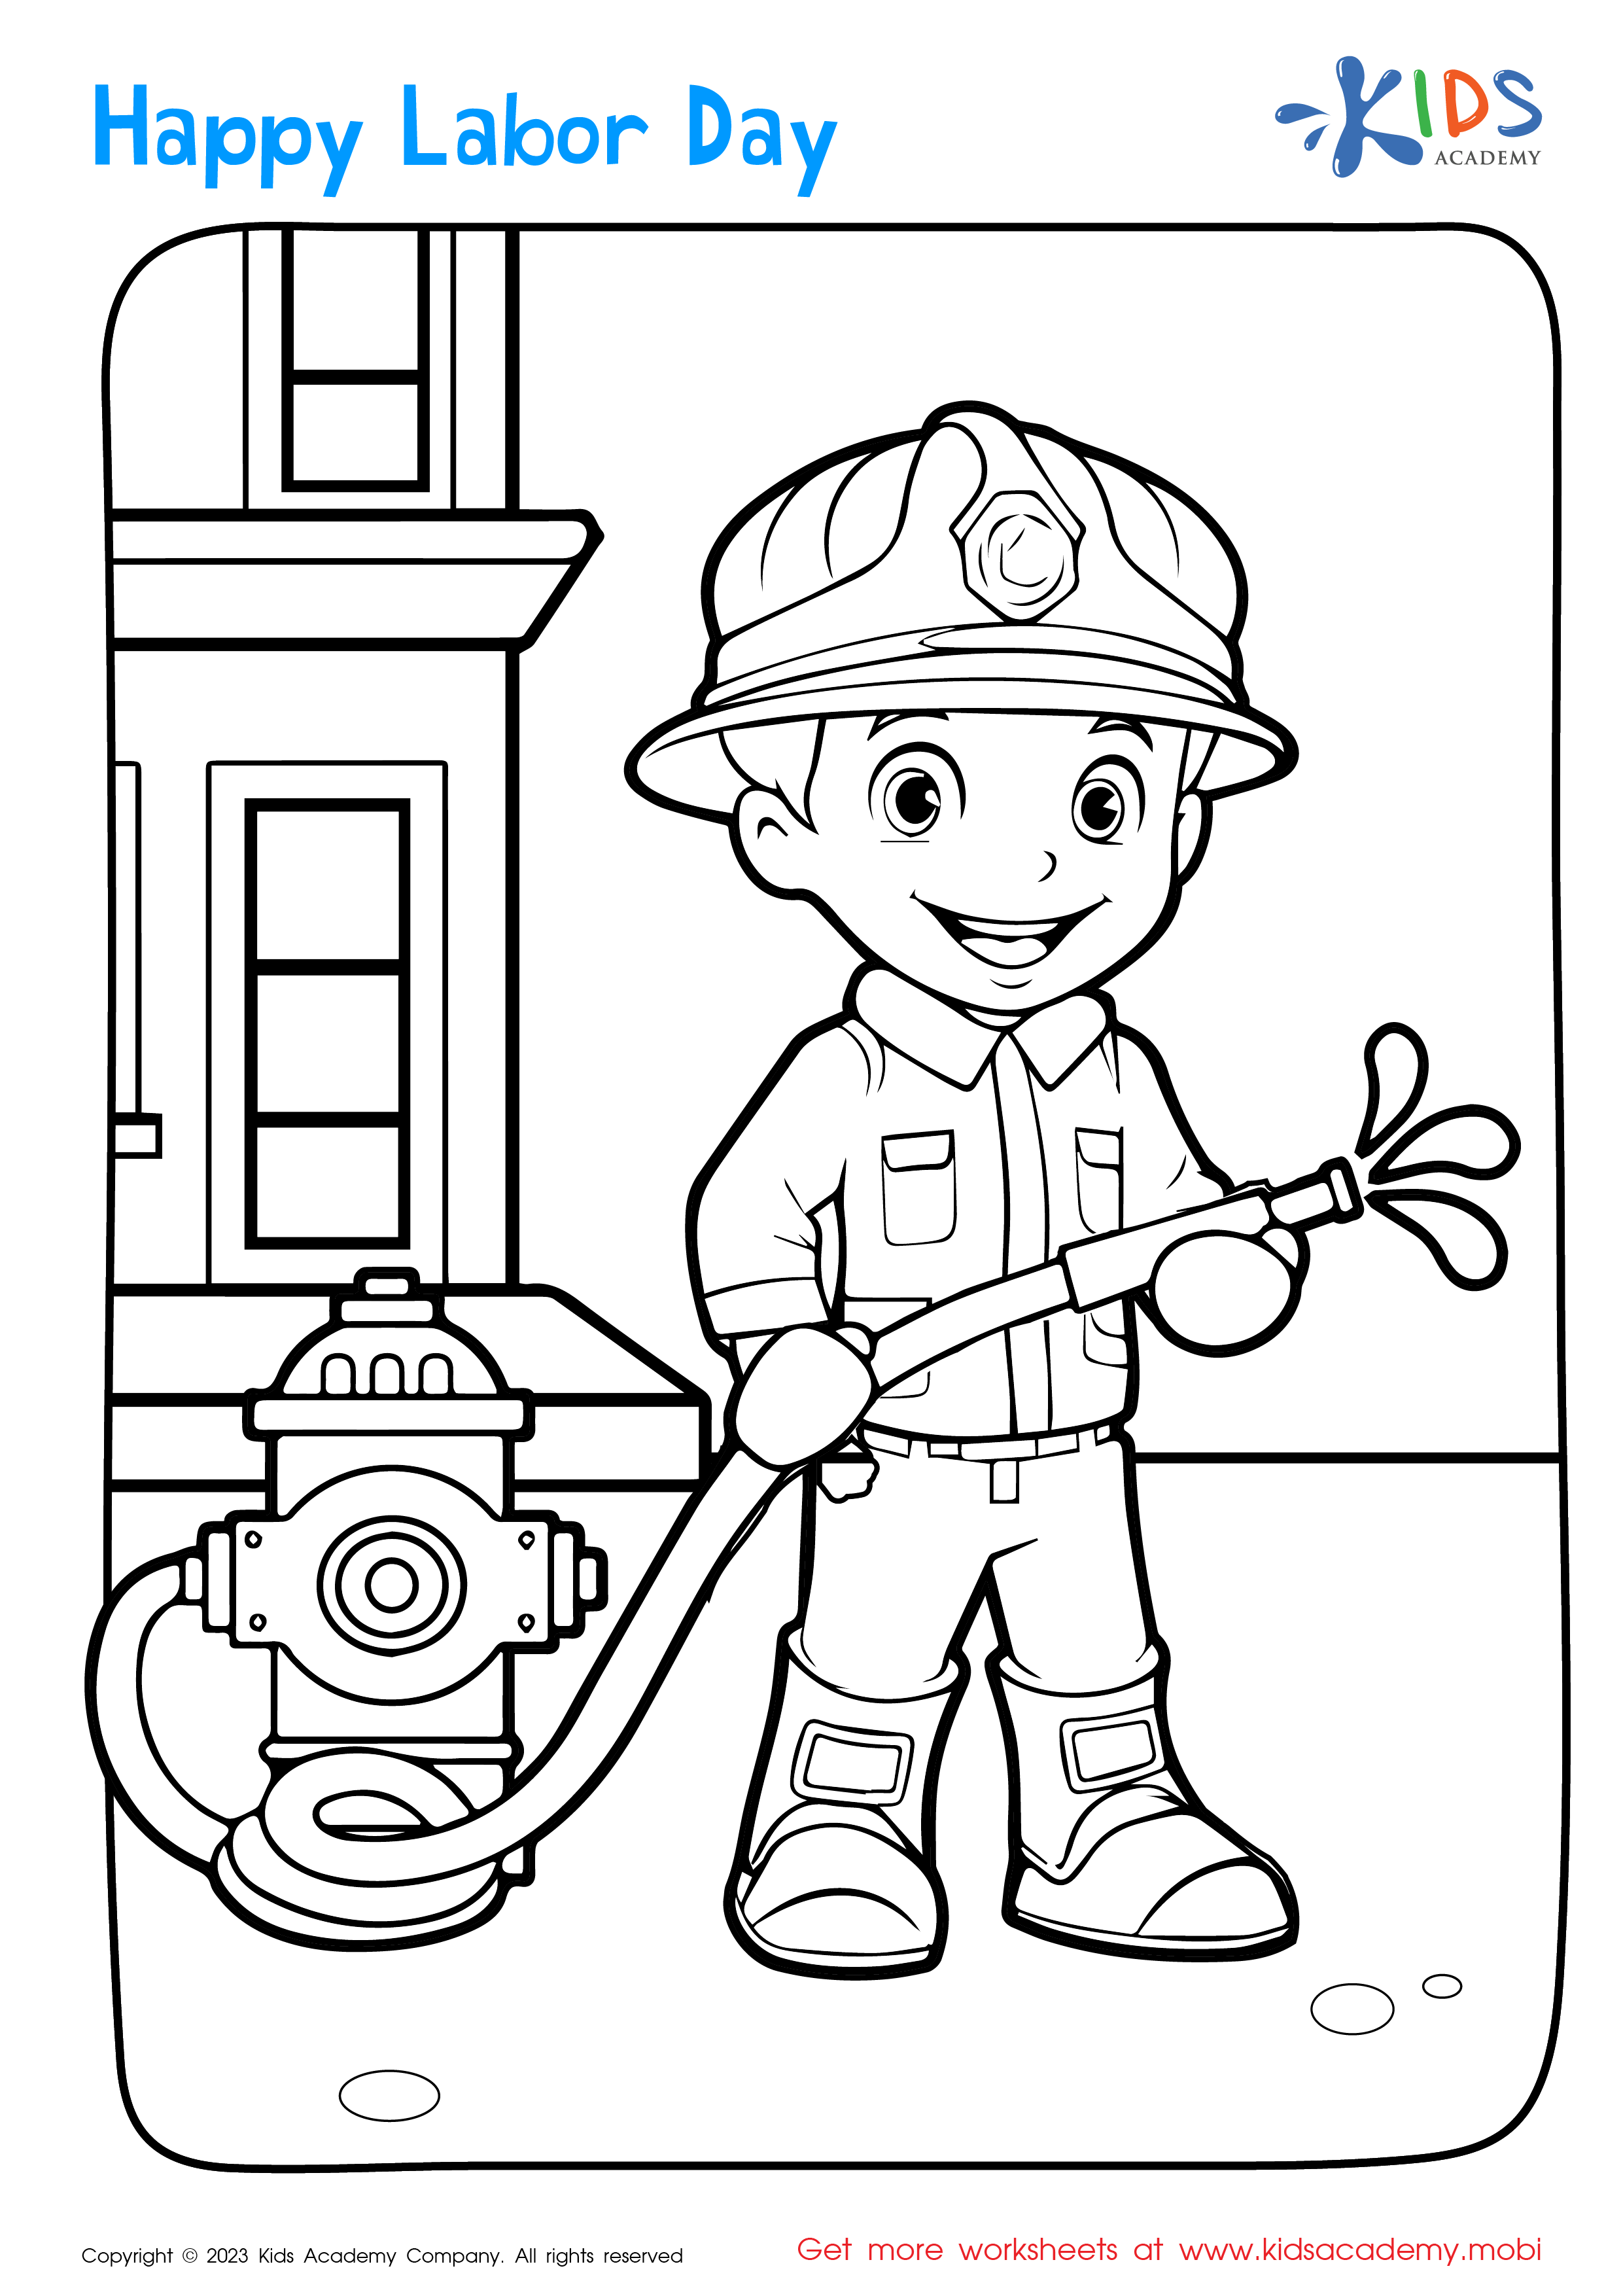 Labor Day: Firefighter